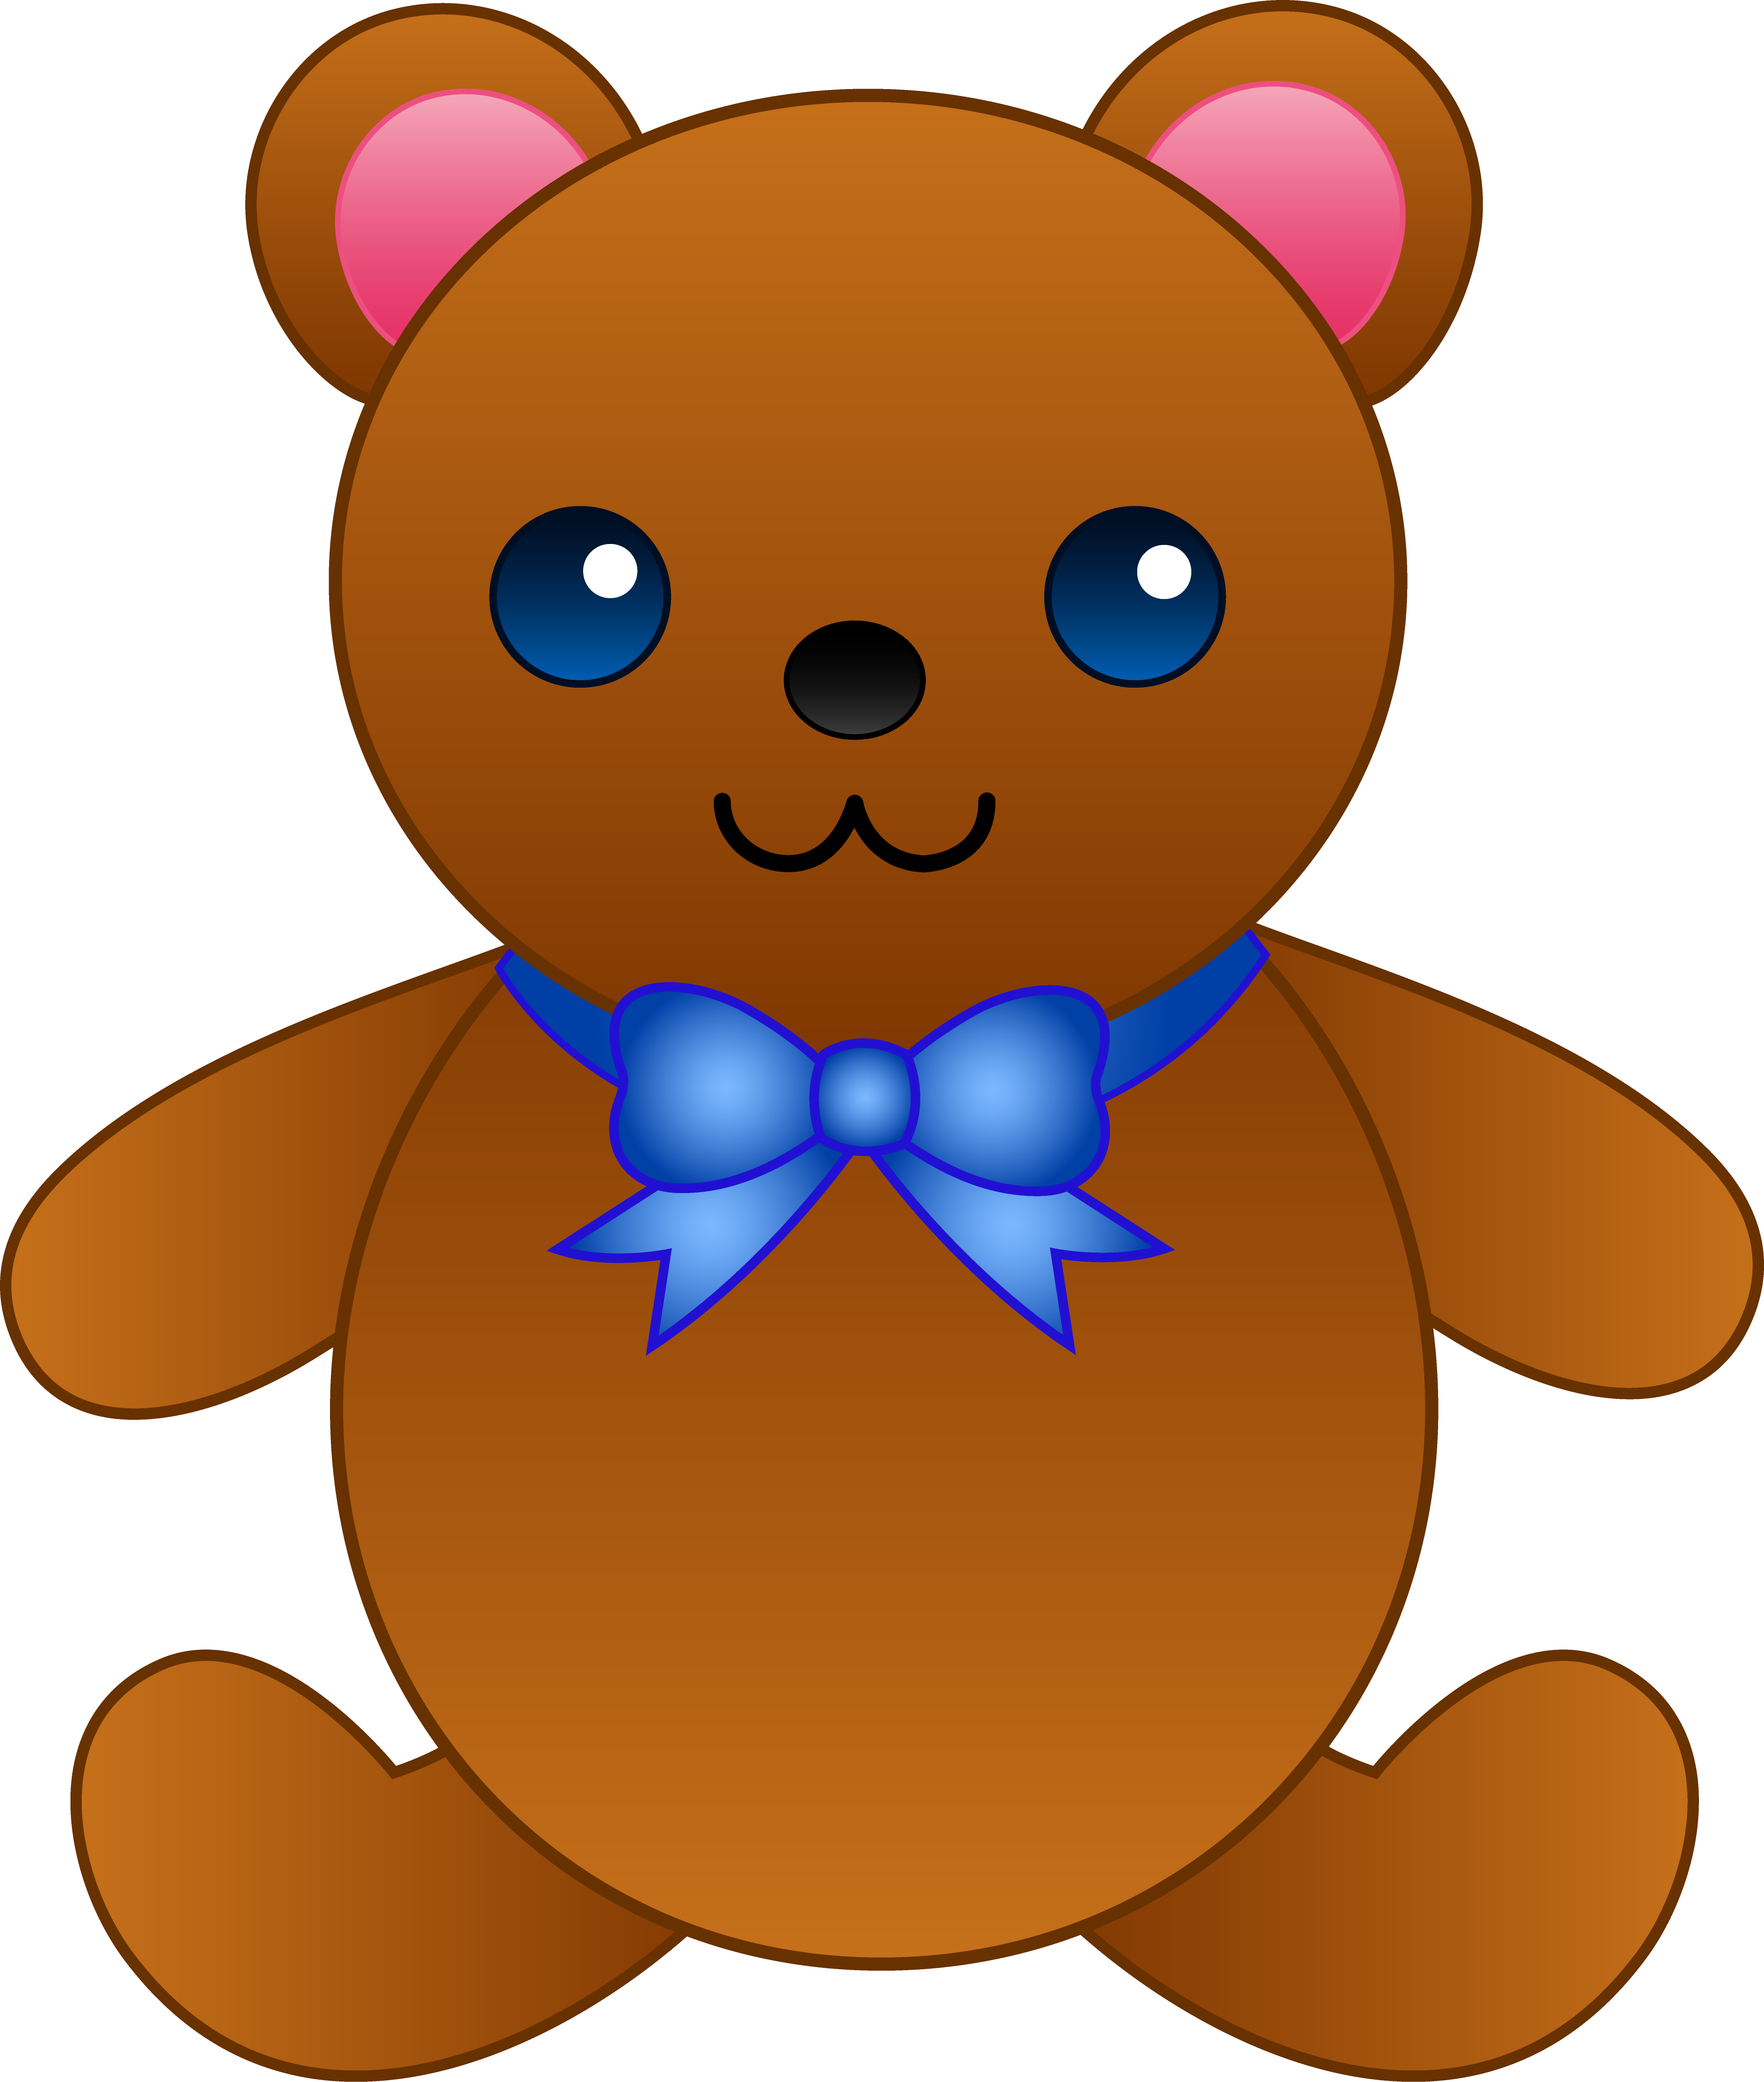 Pictures Of Cute Teddy Bear Cartoons - ClipArt Best